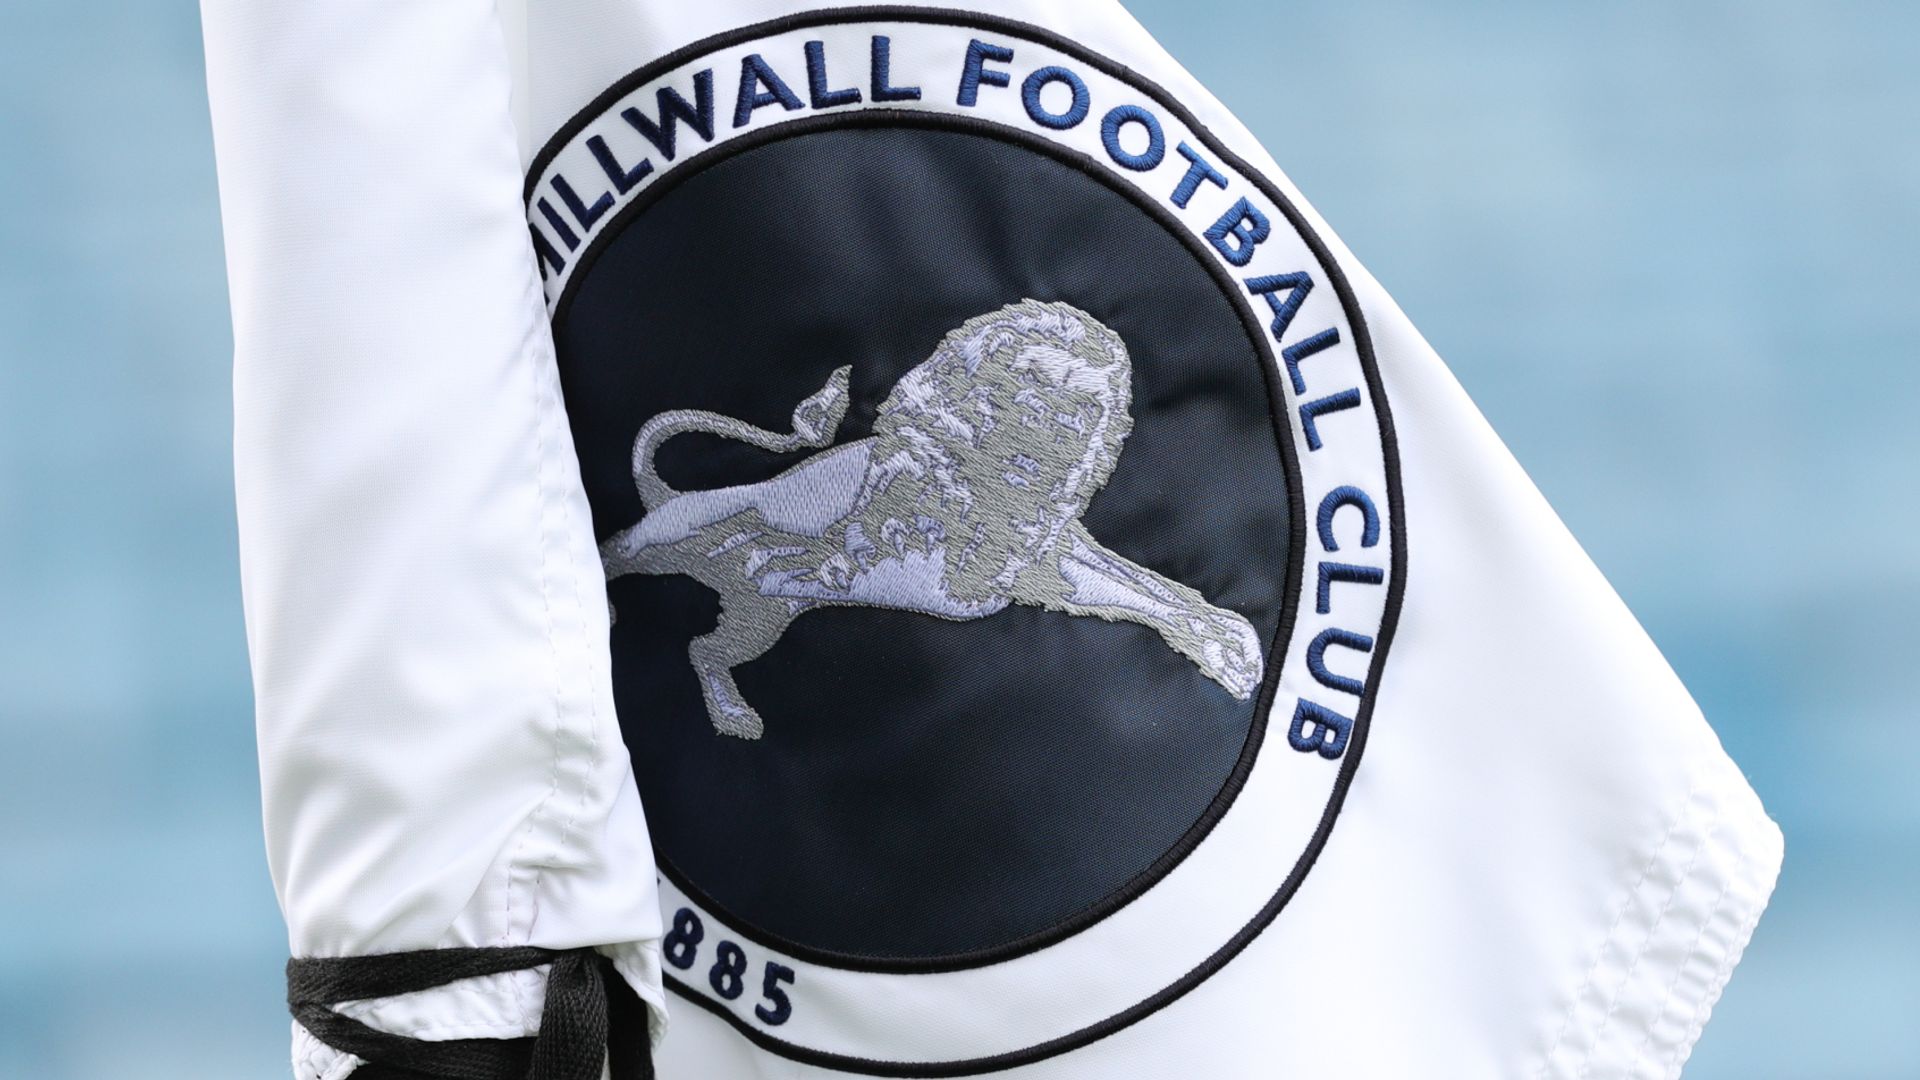 Police investigating after Derby player allegedly abused at Millwall